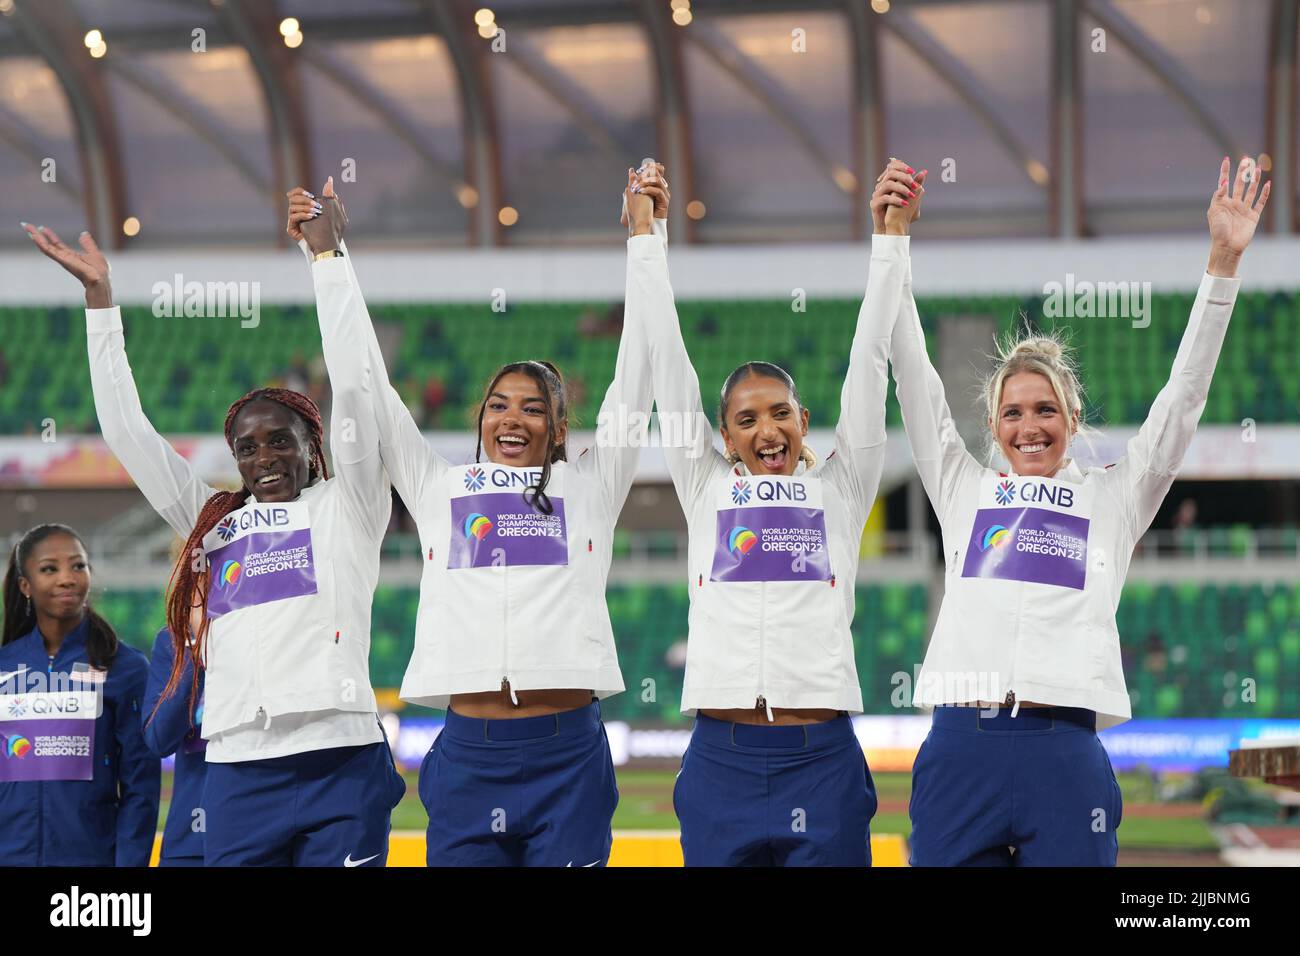 Eugene, USA. 24th July, 2022. Bronze medalists Victoria Ohuruogu, Nicole Yeargin, Laviai Nielsen and Jessie Knight (L-R) of Team Britain celebrate during the women's 4x400m relay awarding ceremony at the World Athletics Championships Oregon22 in Eugene, Oregon, the United States, July 24, 2022. Credit: Wu Xiaoling/Xinhua/Alamy Live News Stock Photo